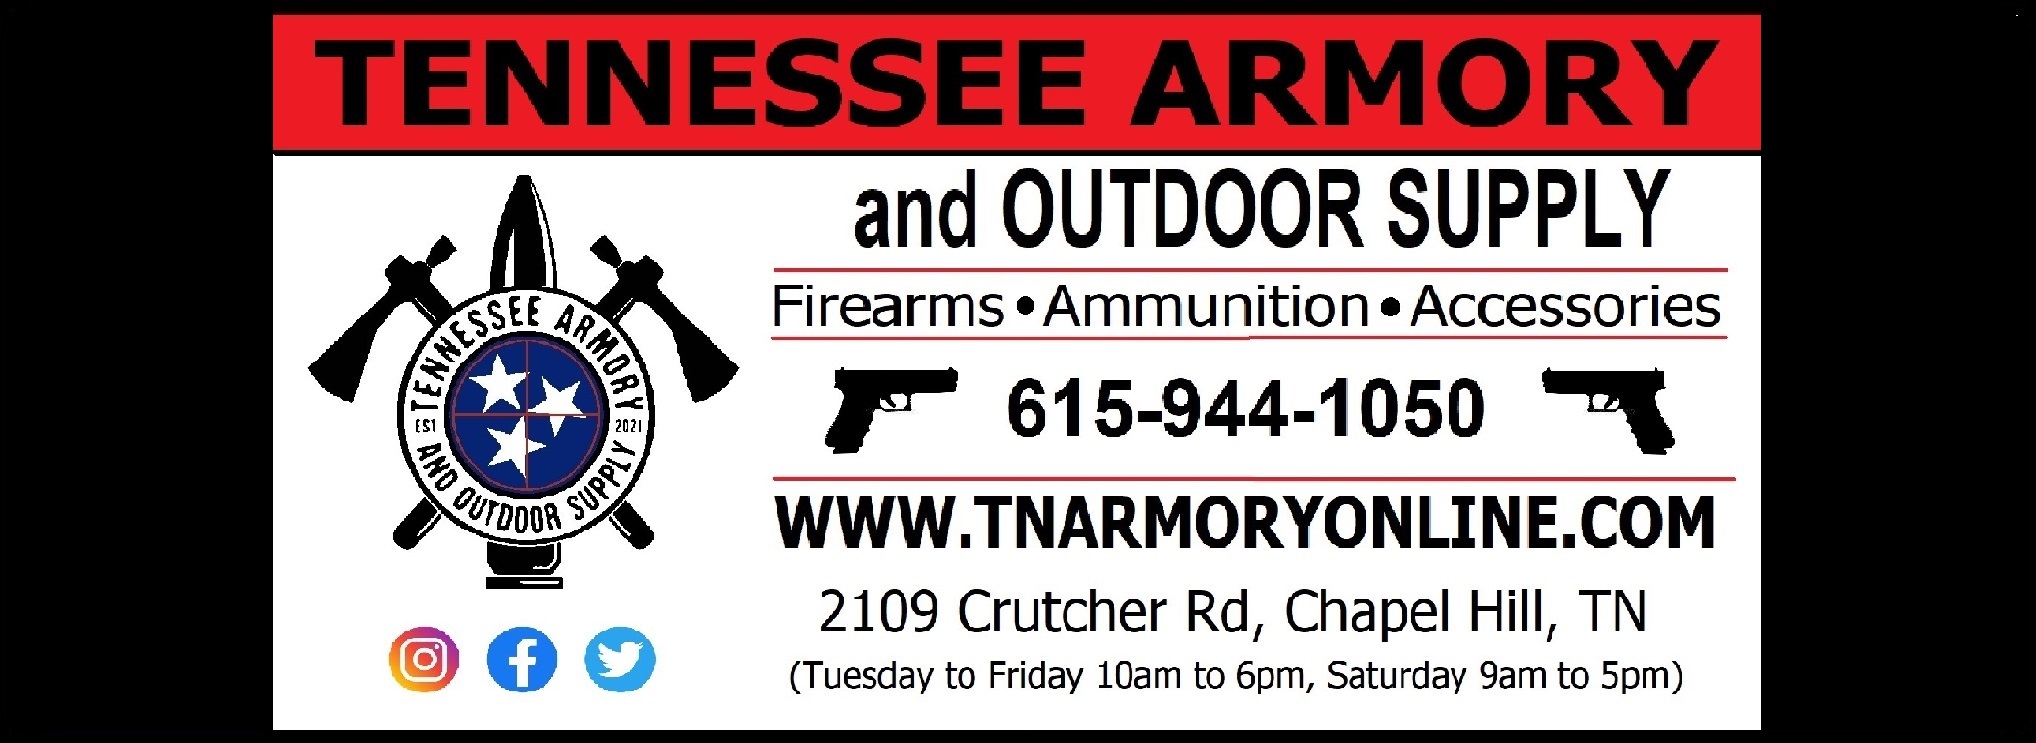 Gun Store and Outdoor Store that specializes in Guns, Gun Parts